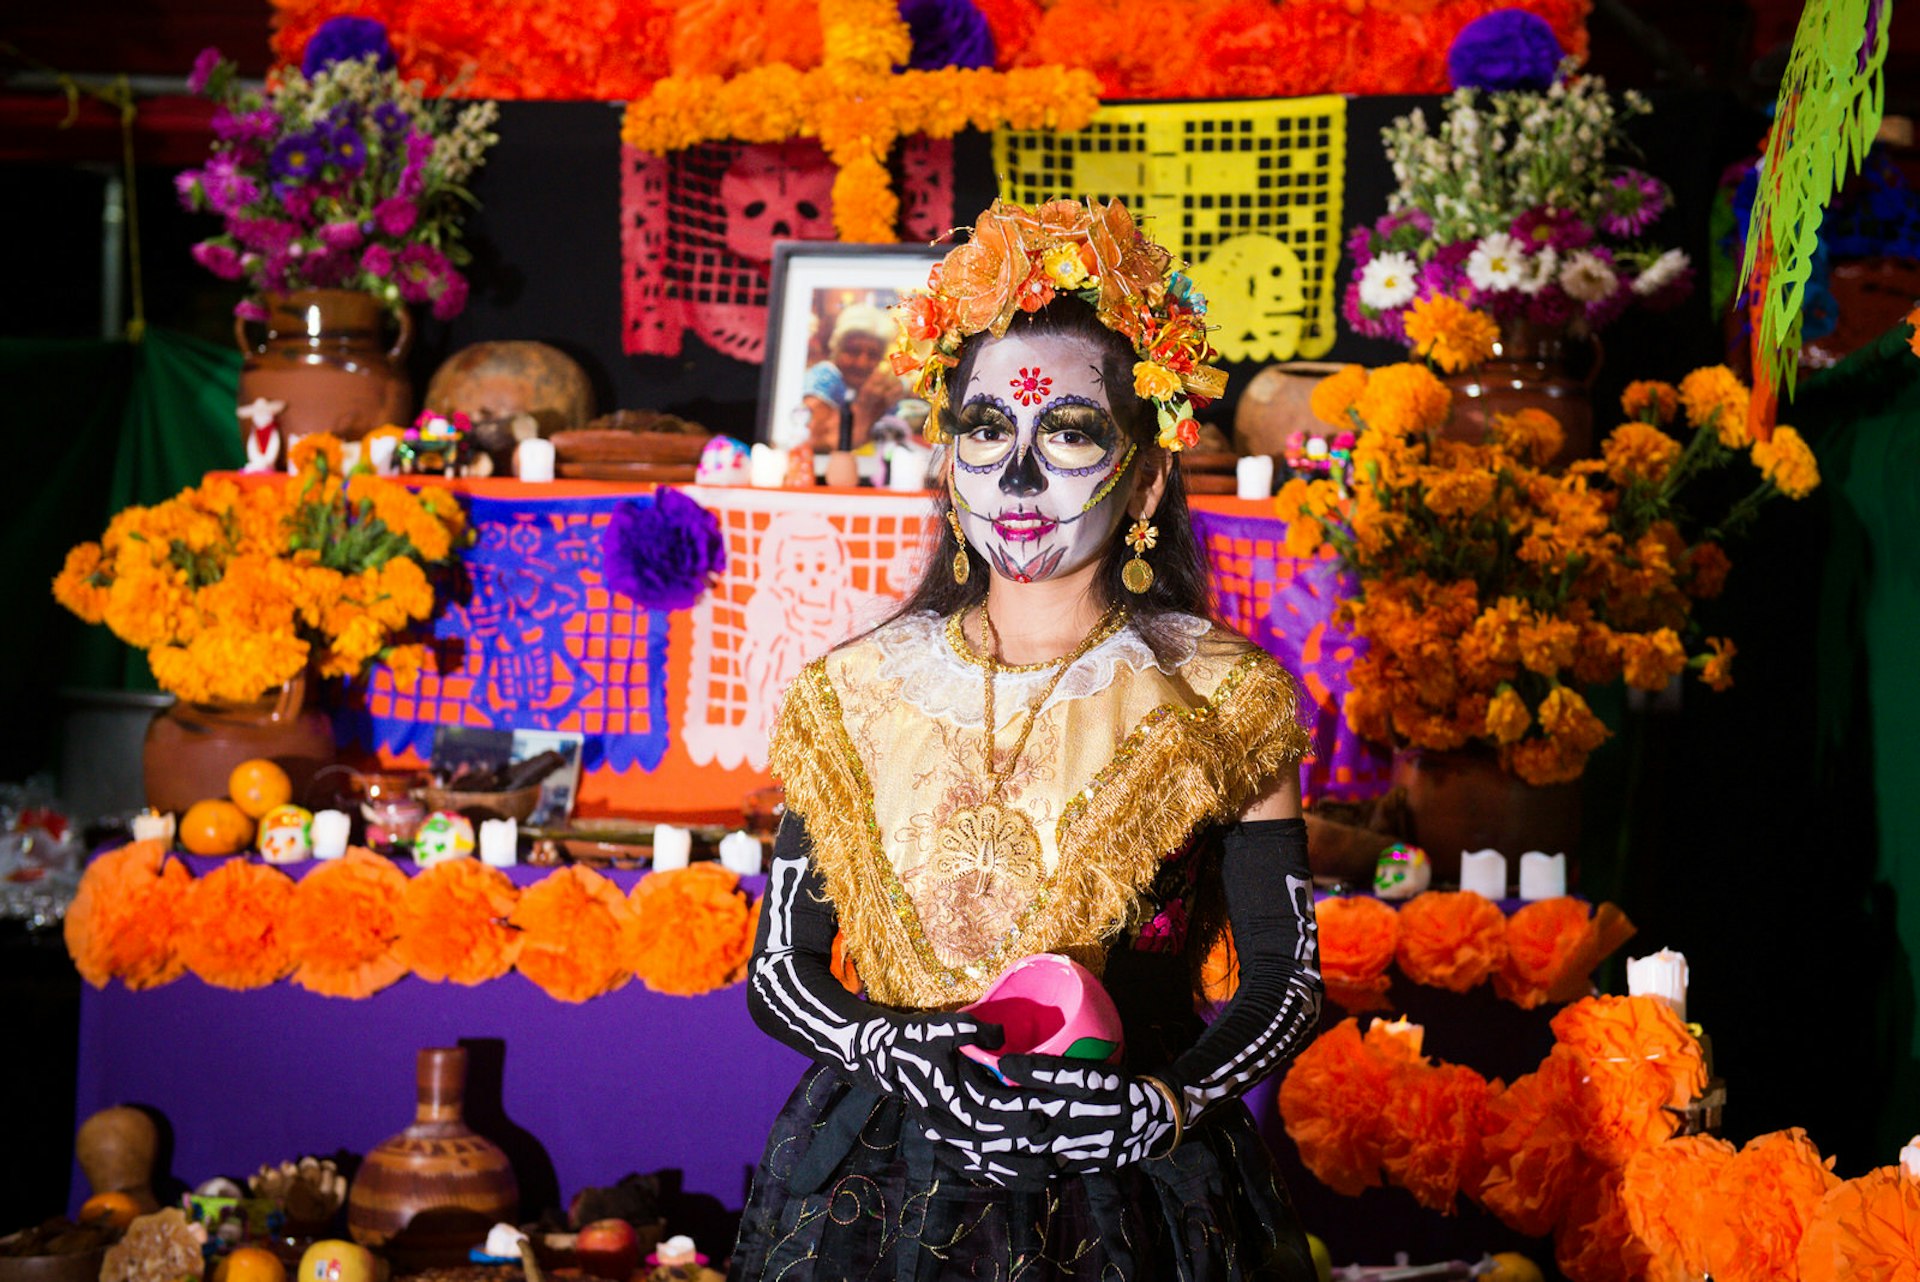 Girl in skeleton costume and face paint stands in front of an altar for the Day of the Dead festival in Mexico